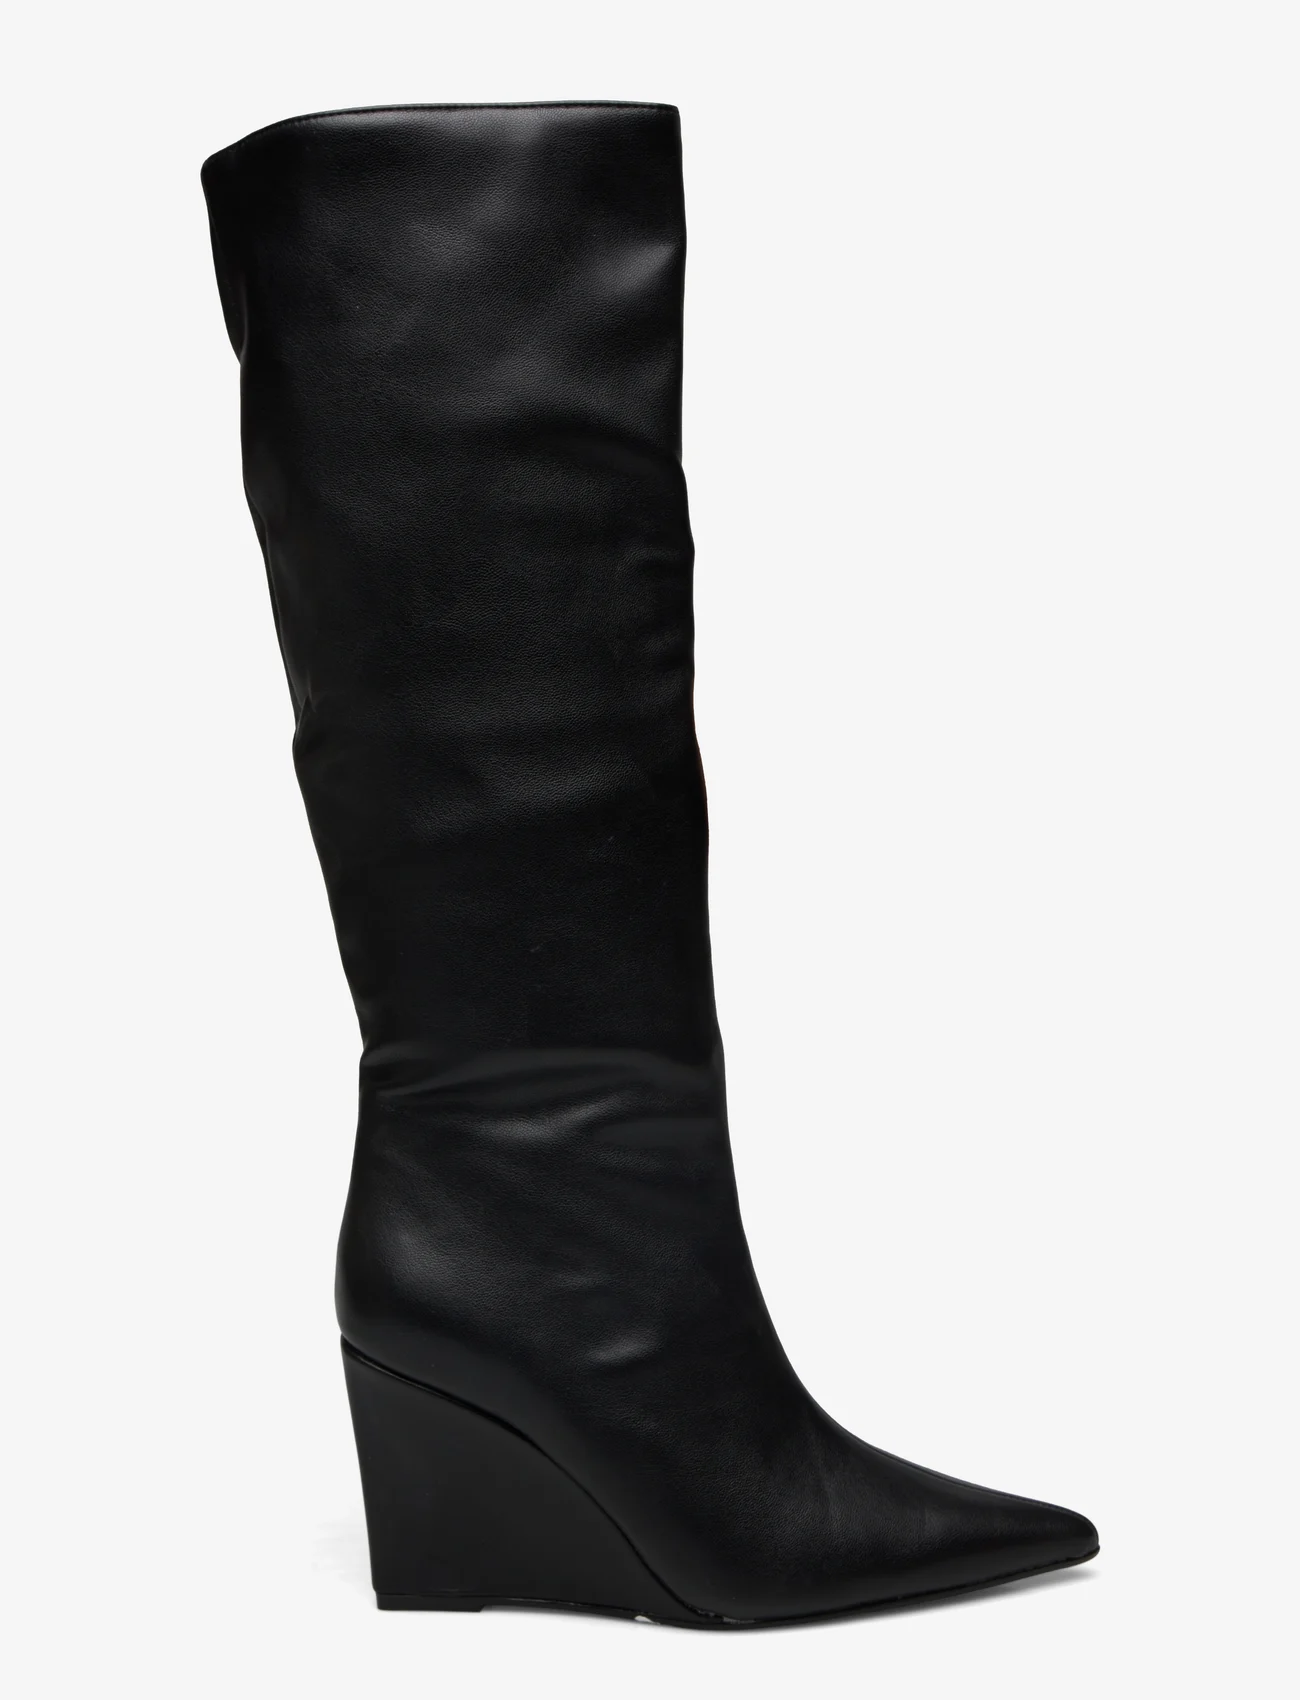 Steve Madden - Showout Boot - kniehohe stiefel - black - 1